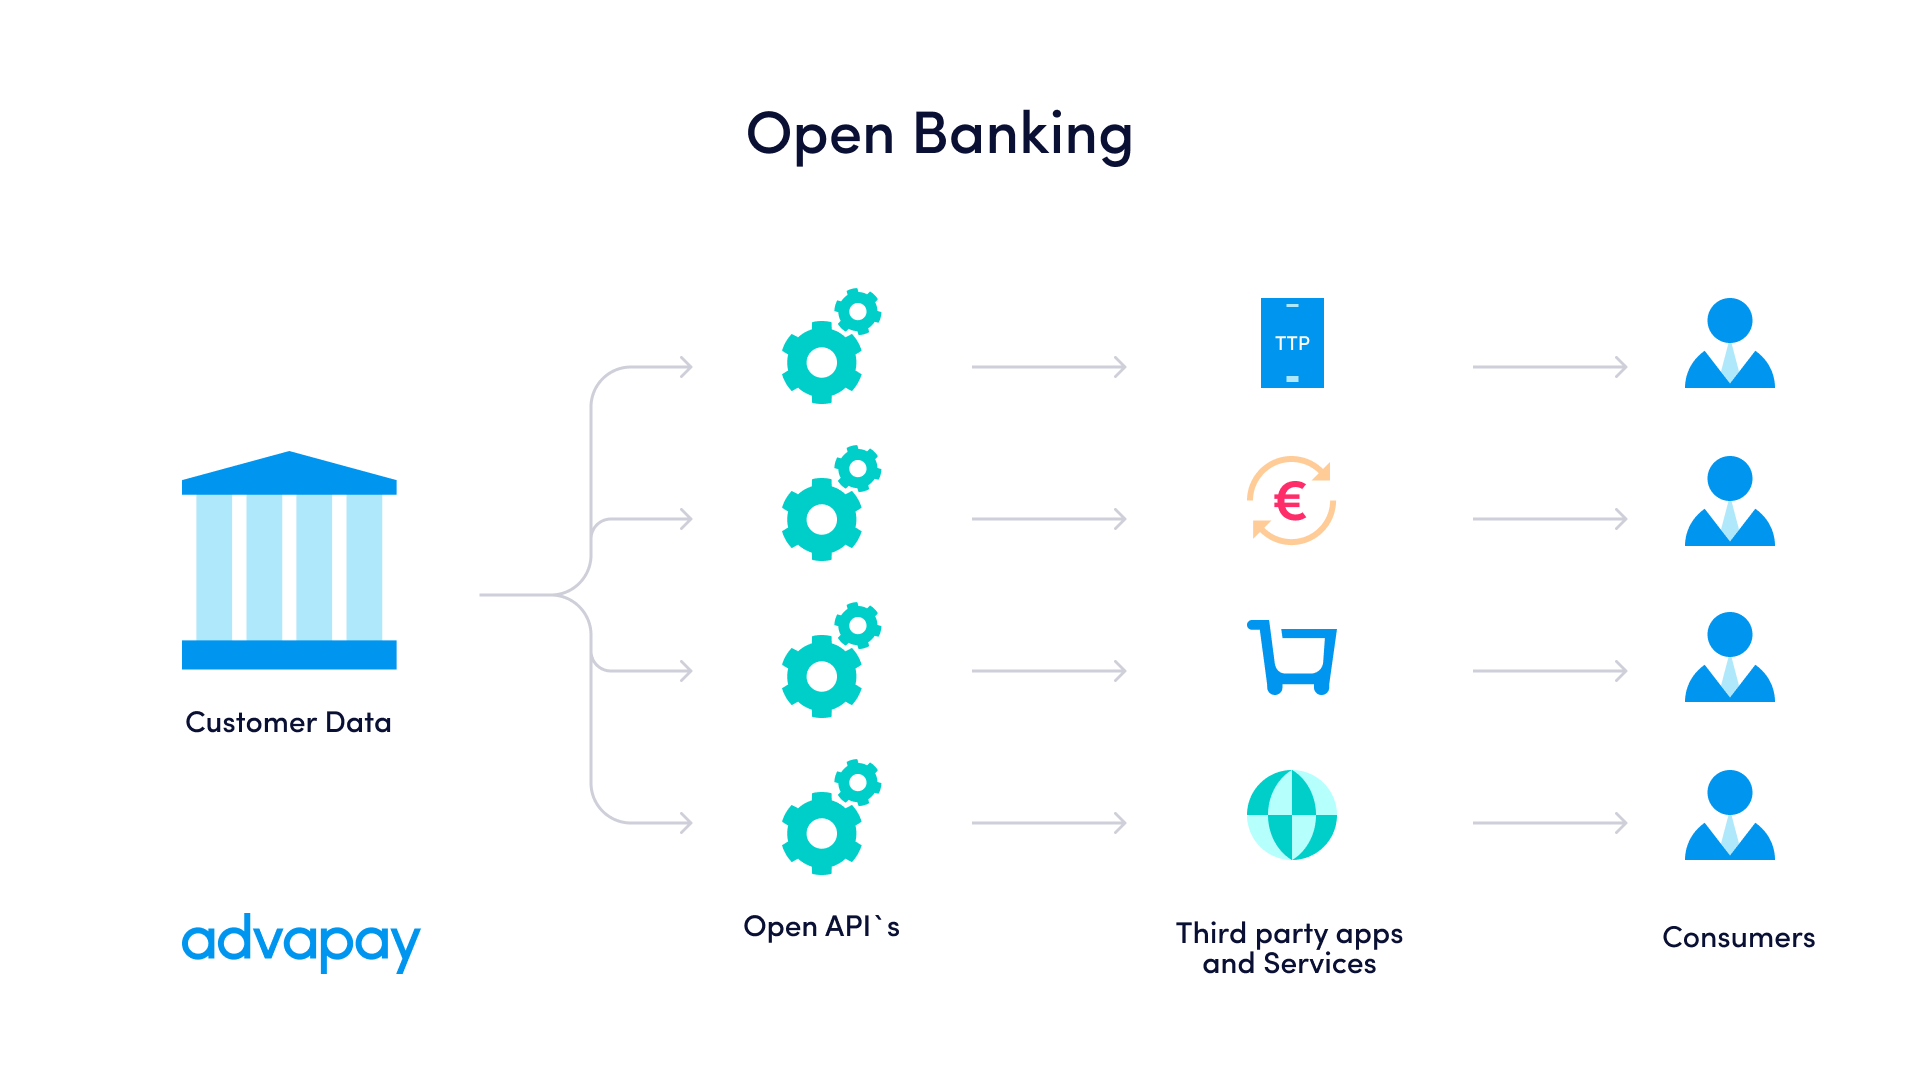 How open banking will change after entering into force new PSR and PSD3. Advapay